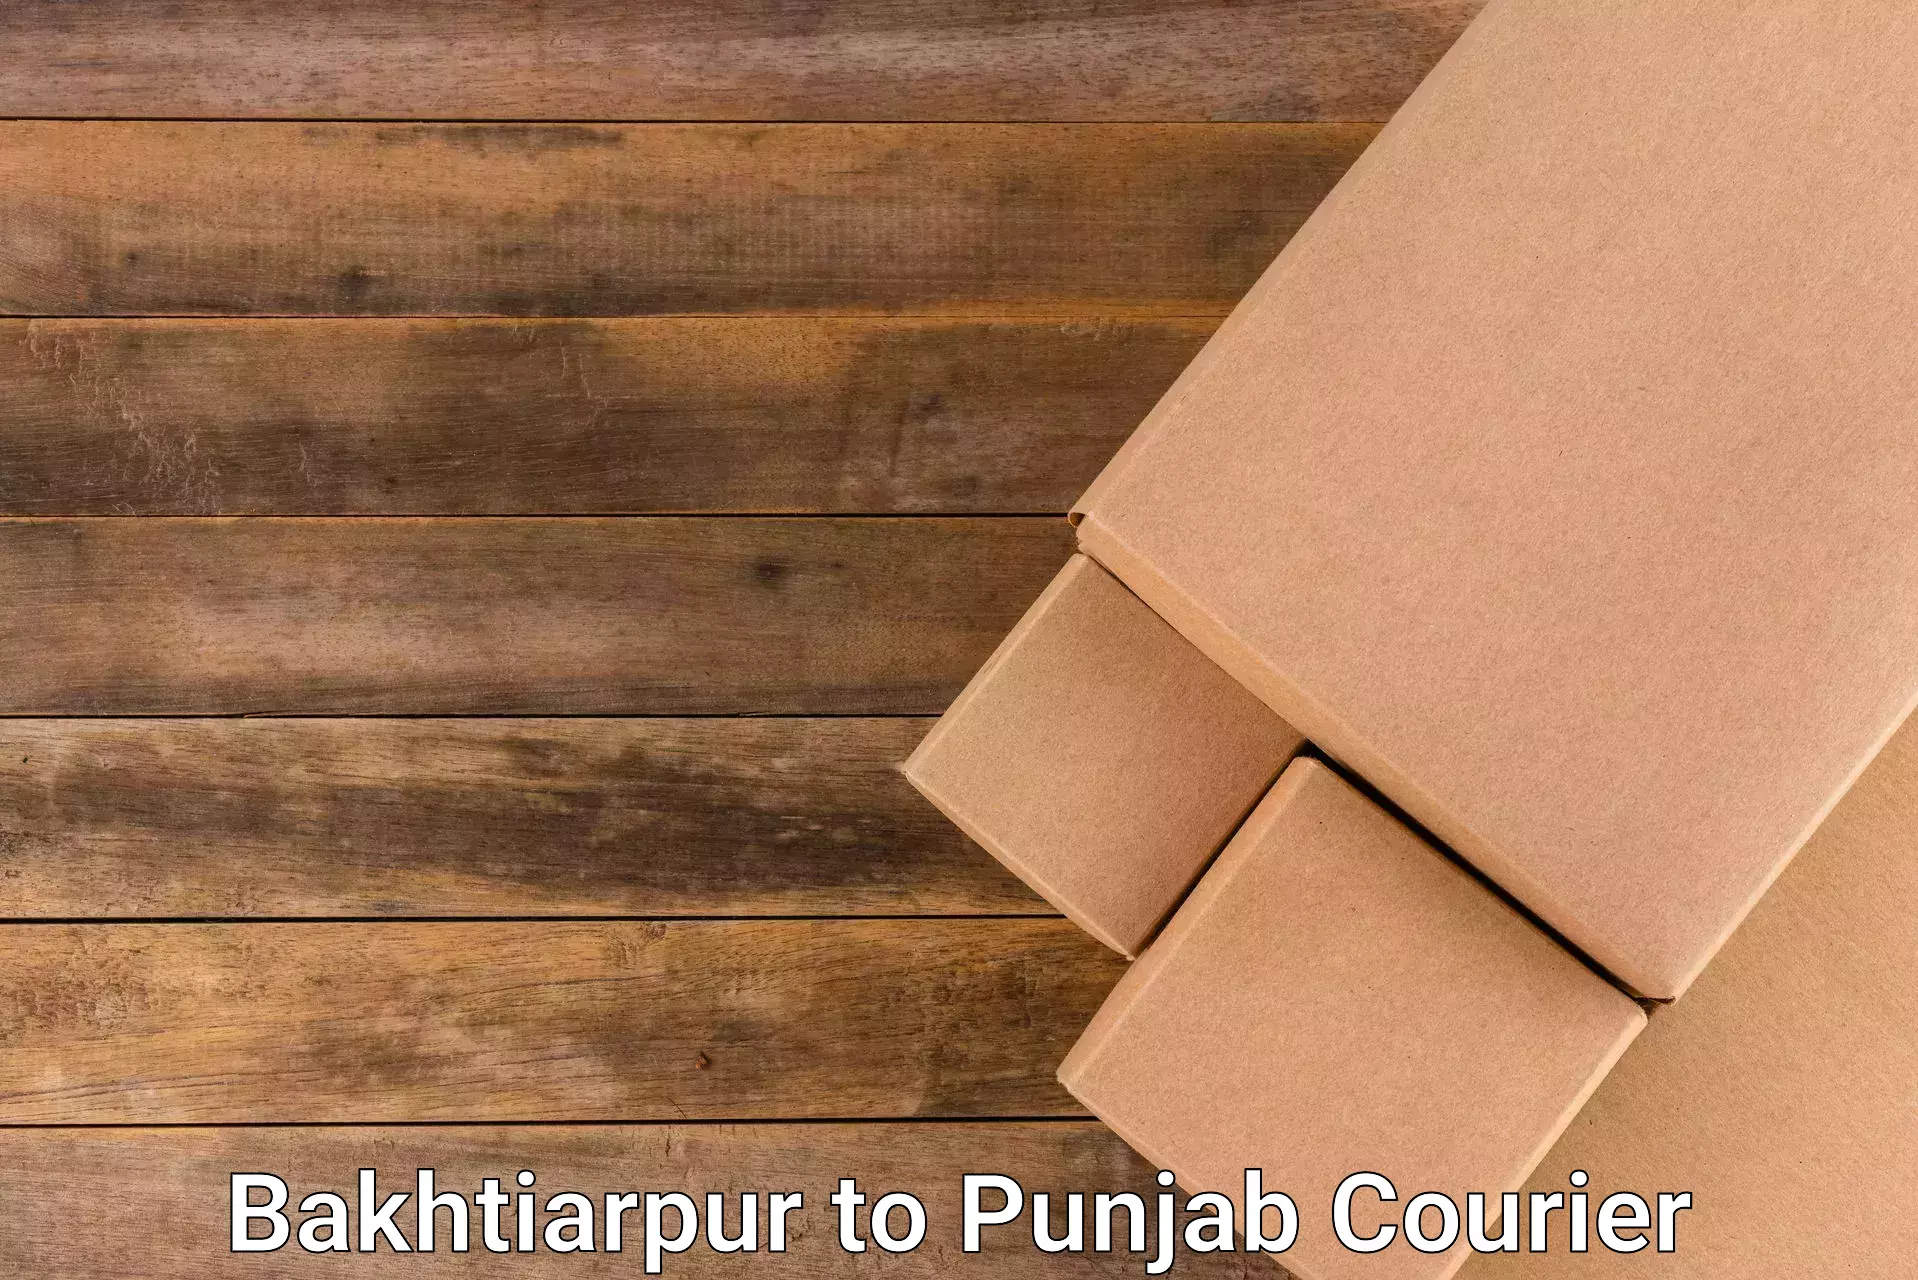 Overnight delivery services in Bakhtiarpur to Jalandhar